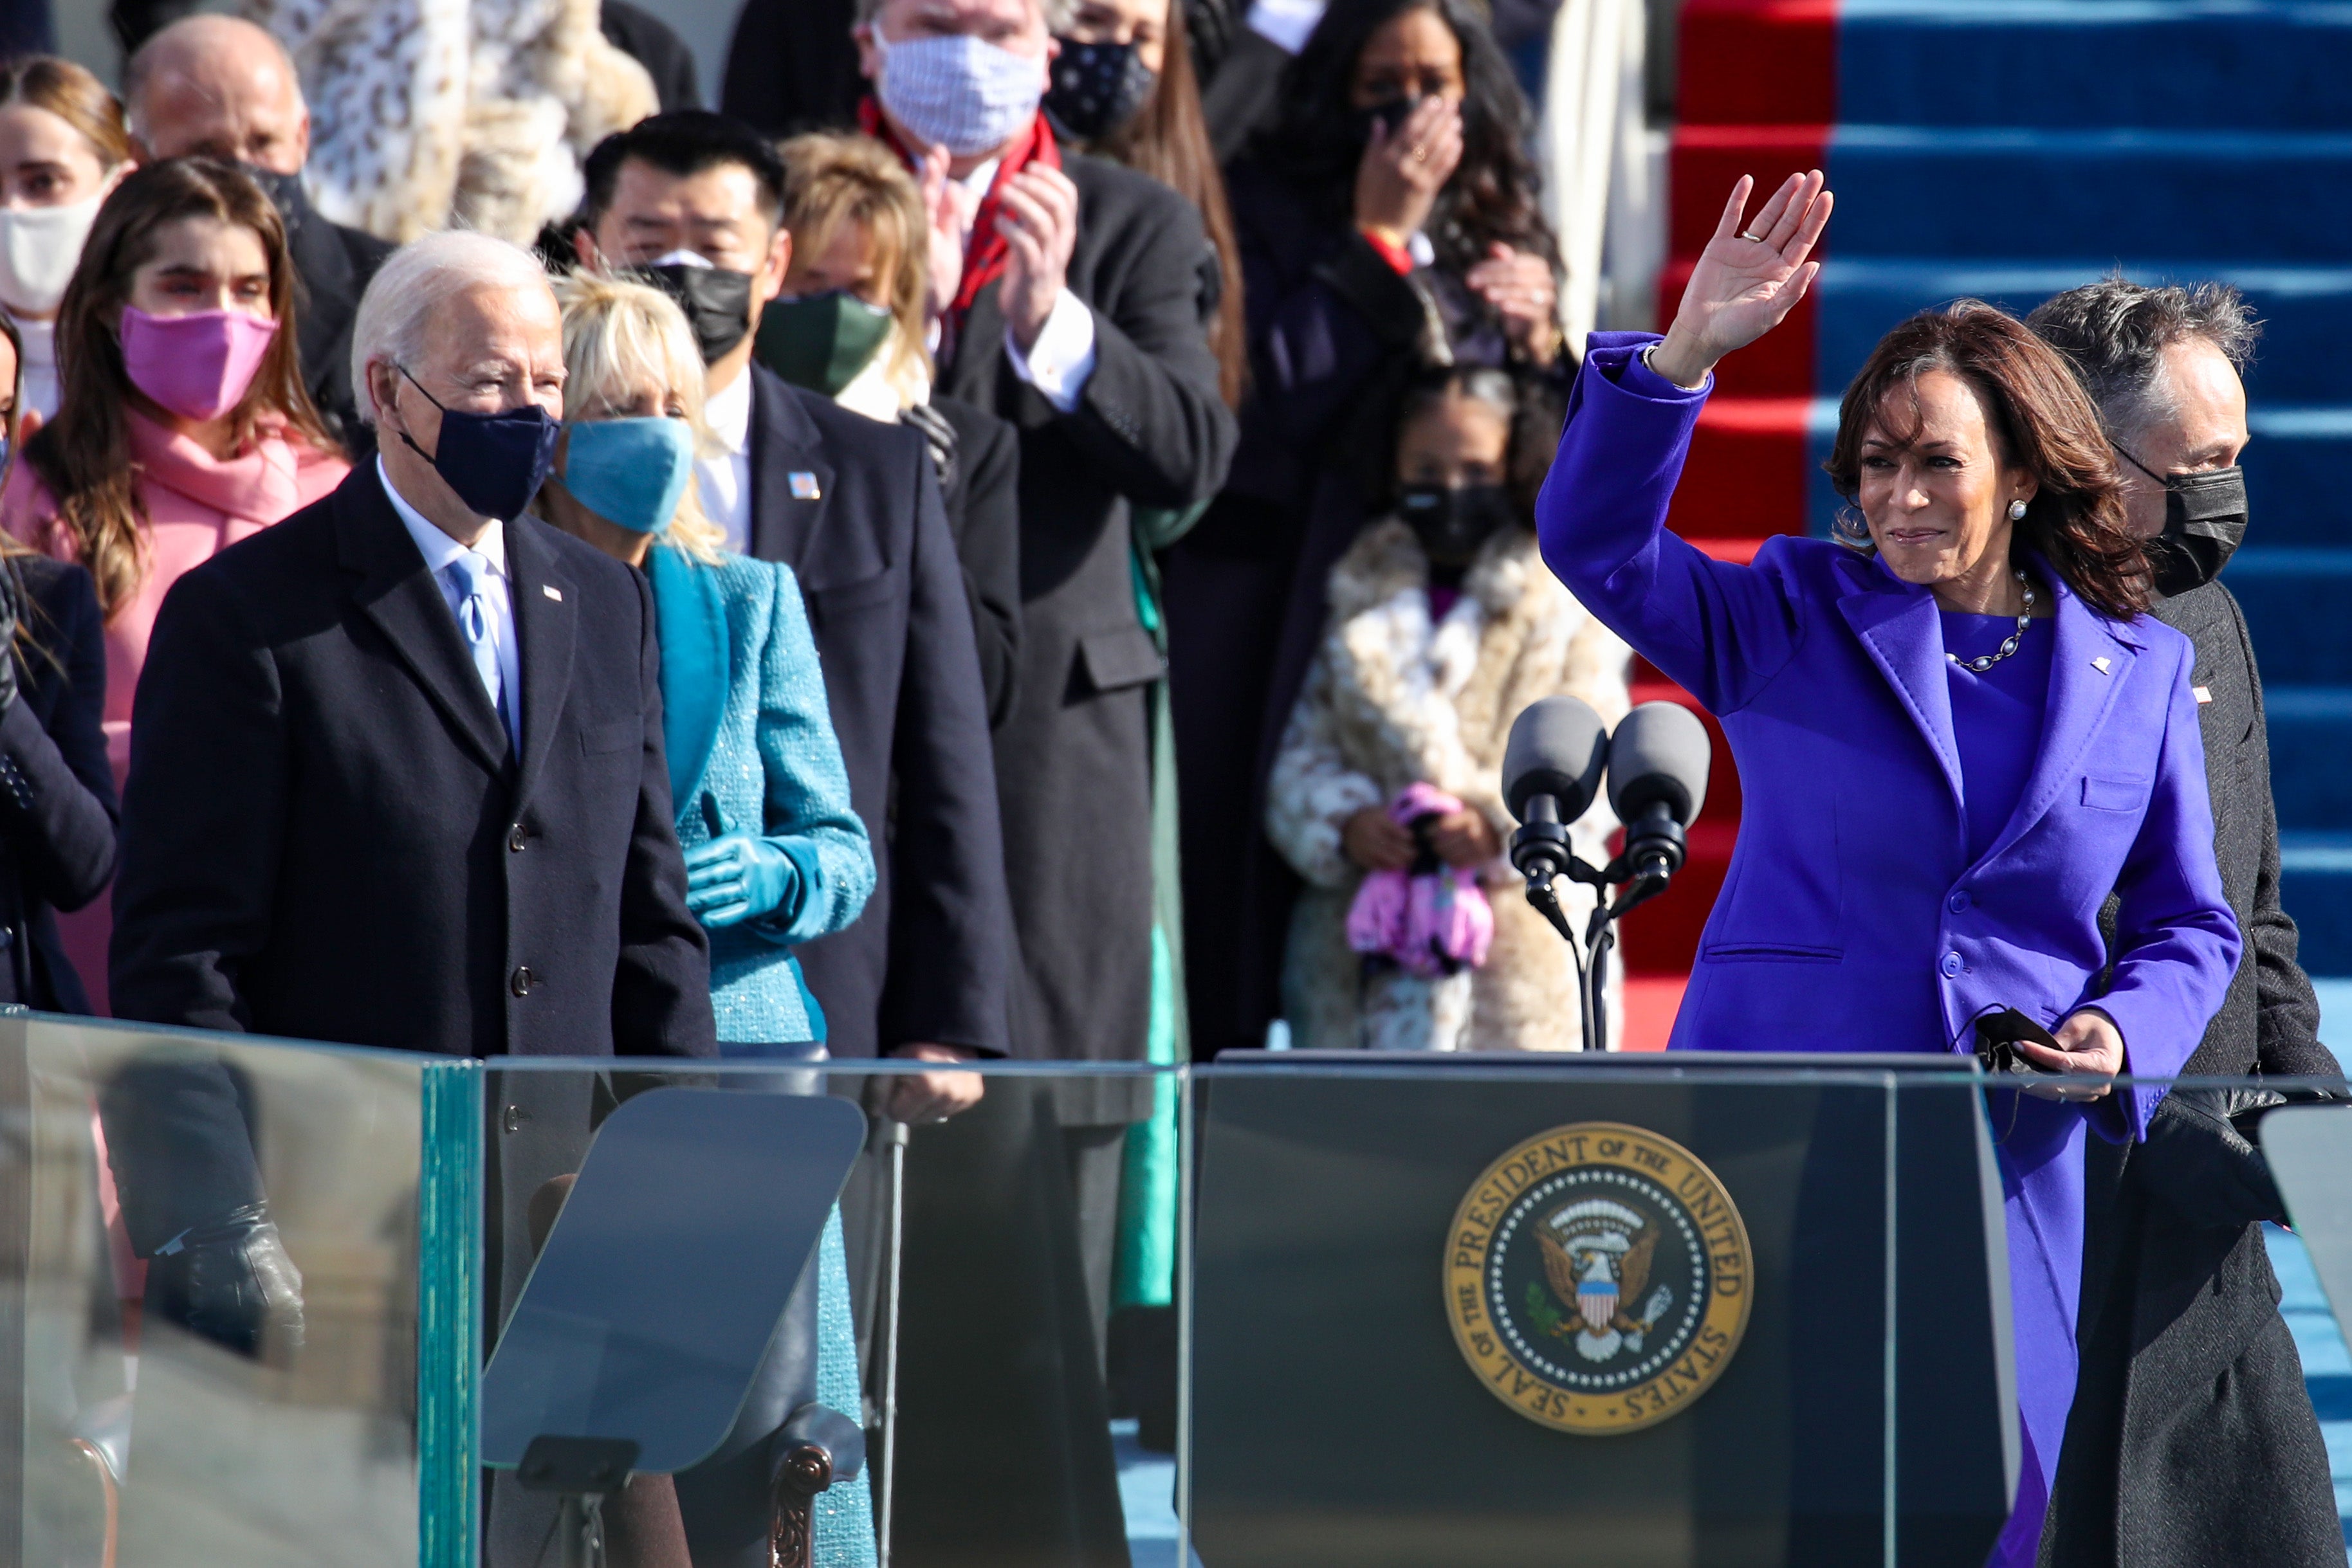 Newly sworn in Vice President Kamala Harris waves to the crowd during the inauguration of U.S. President-elect Joe Biden on the West Front of the U.S. Capitol on January 20, 2021 in Washington, DC.